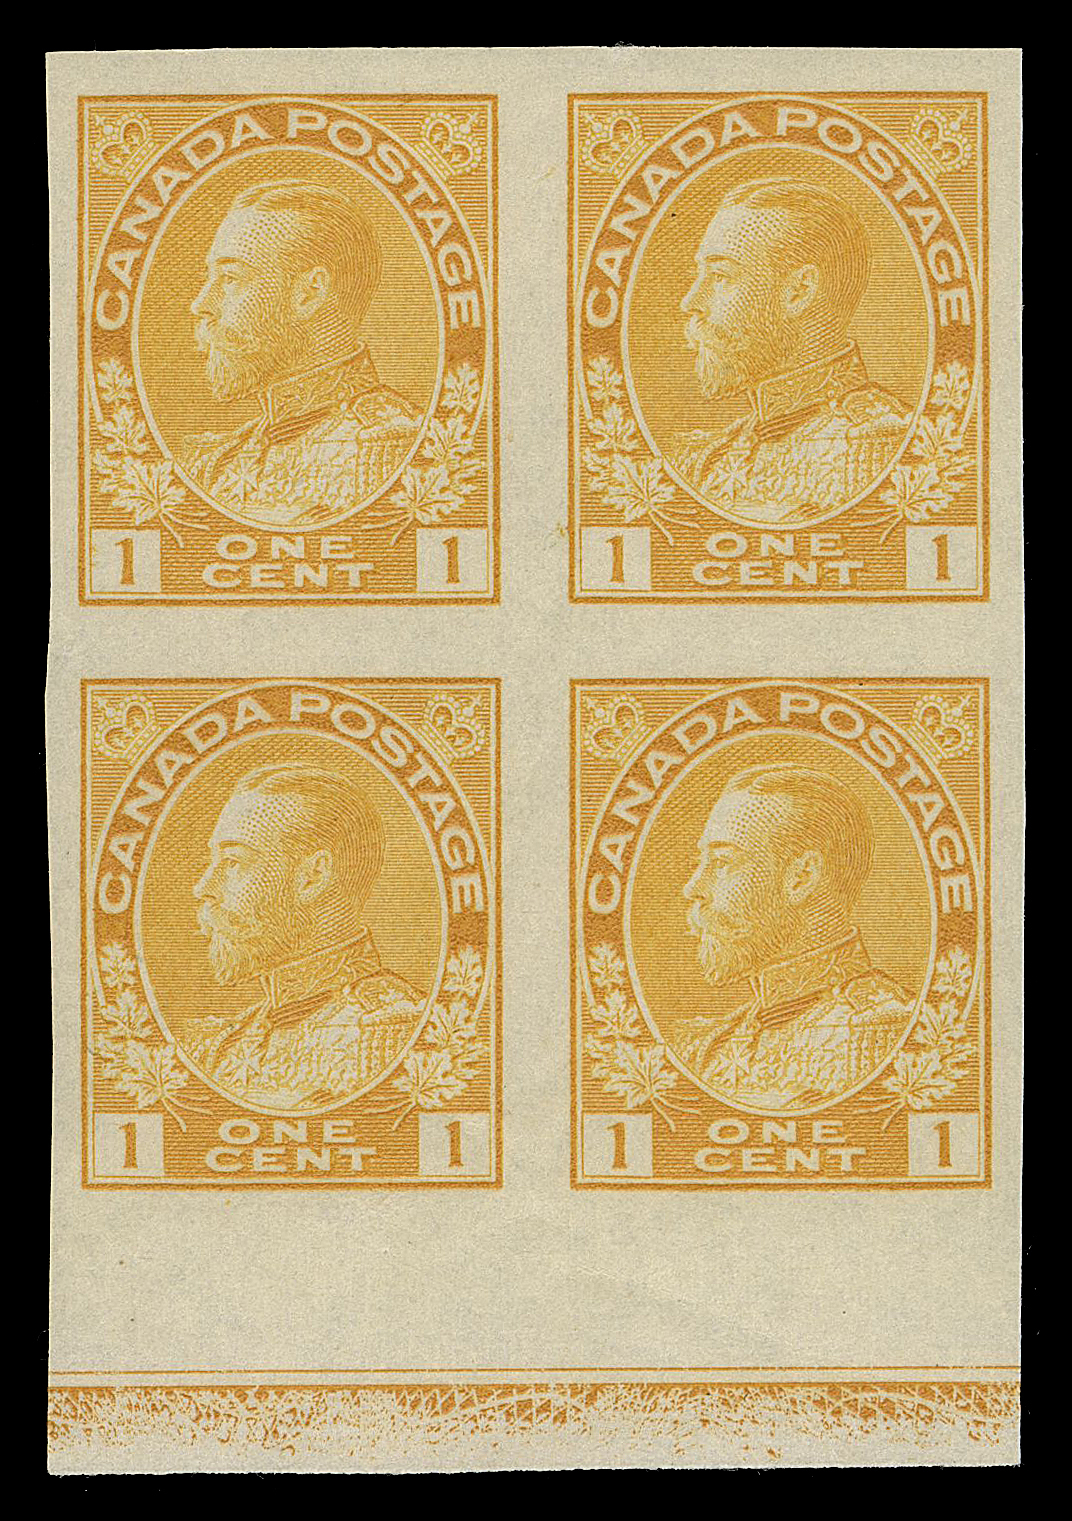 ADMIRAL STAMPS  136,A fresh mint imperforate block showing normal strength Type B lathework, faint gum crease in margin, LH at top only, VF